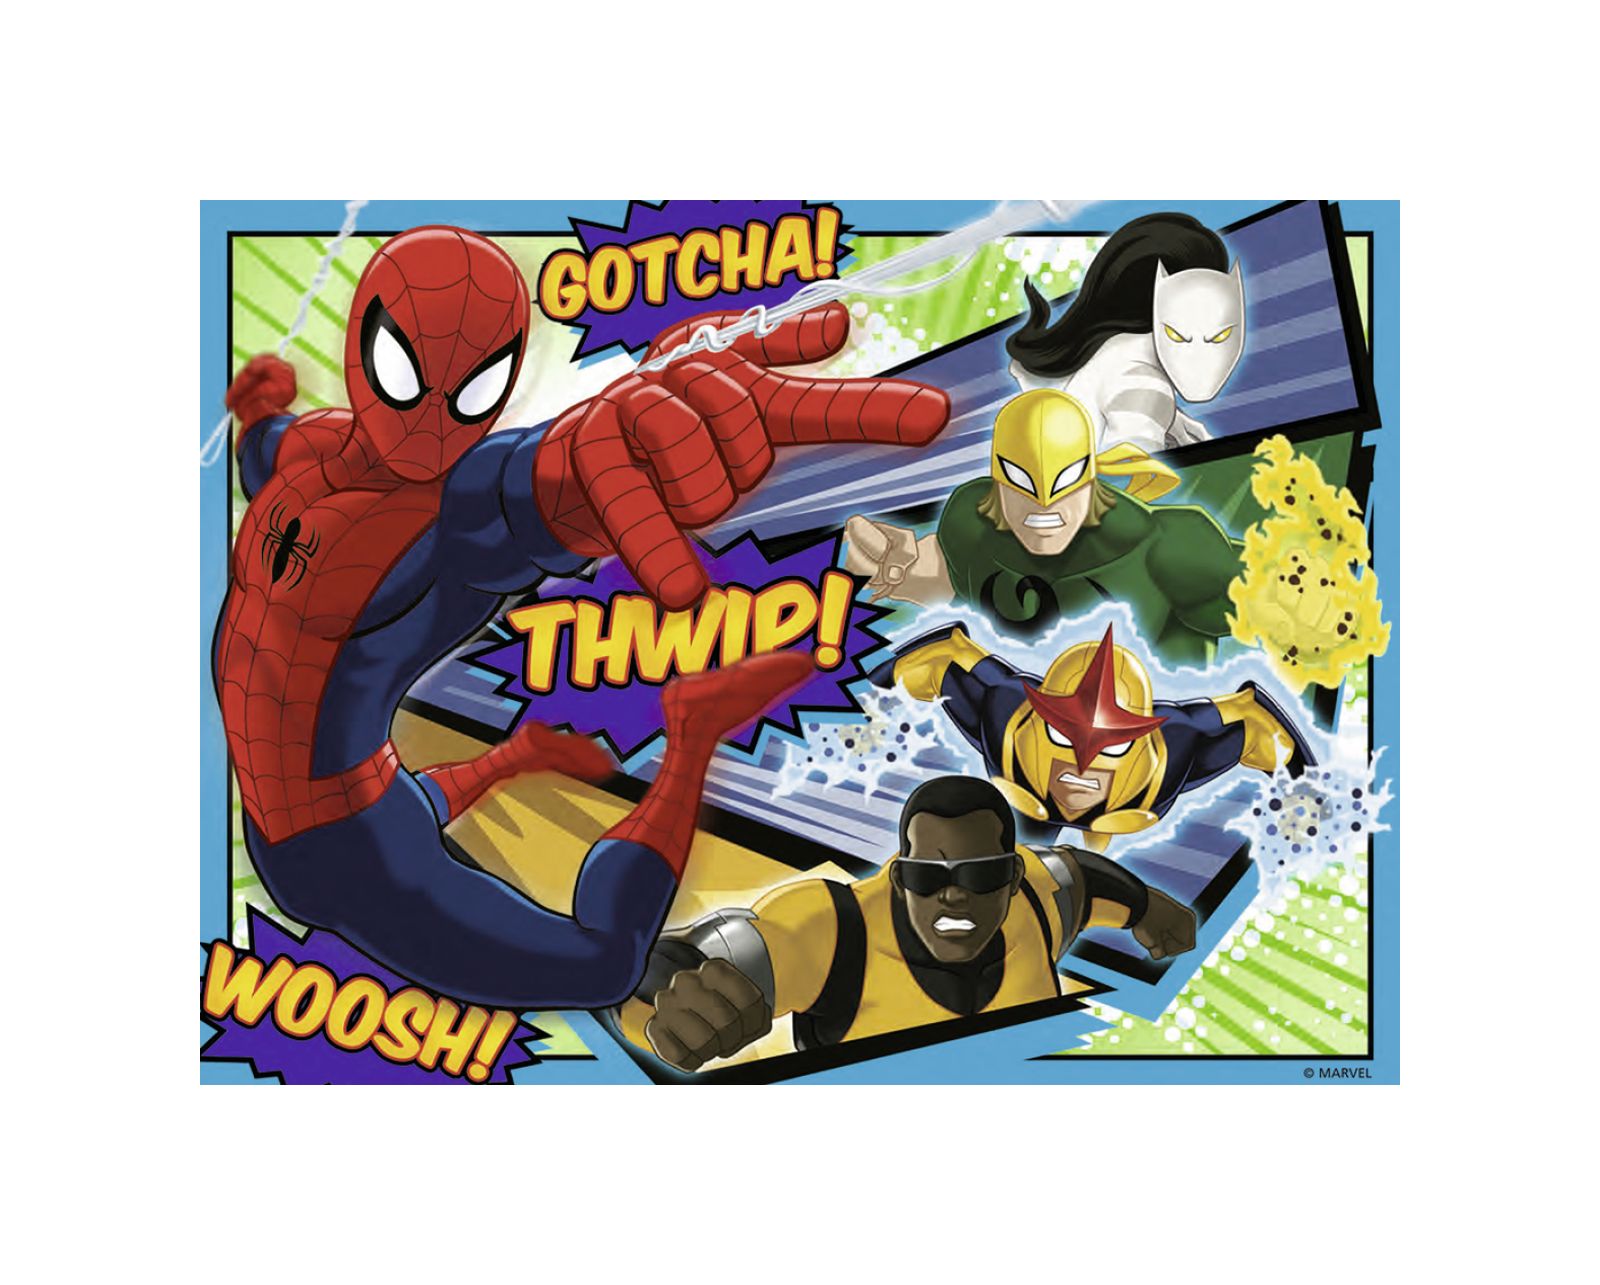 Ravensburger puzzle 4 in a box - ultimate spiderman - RAVENSBURGER, Spiderman